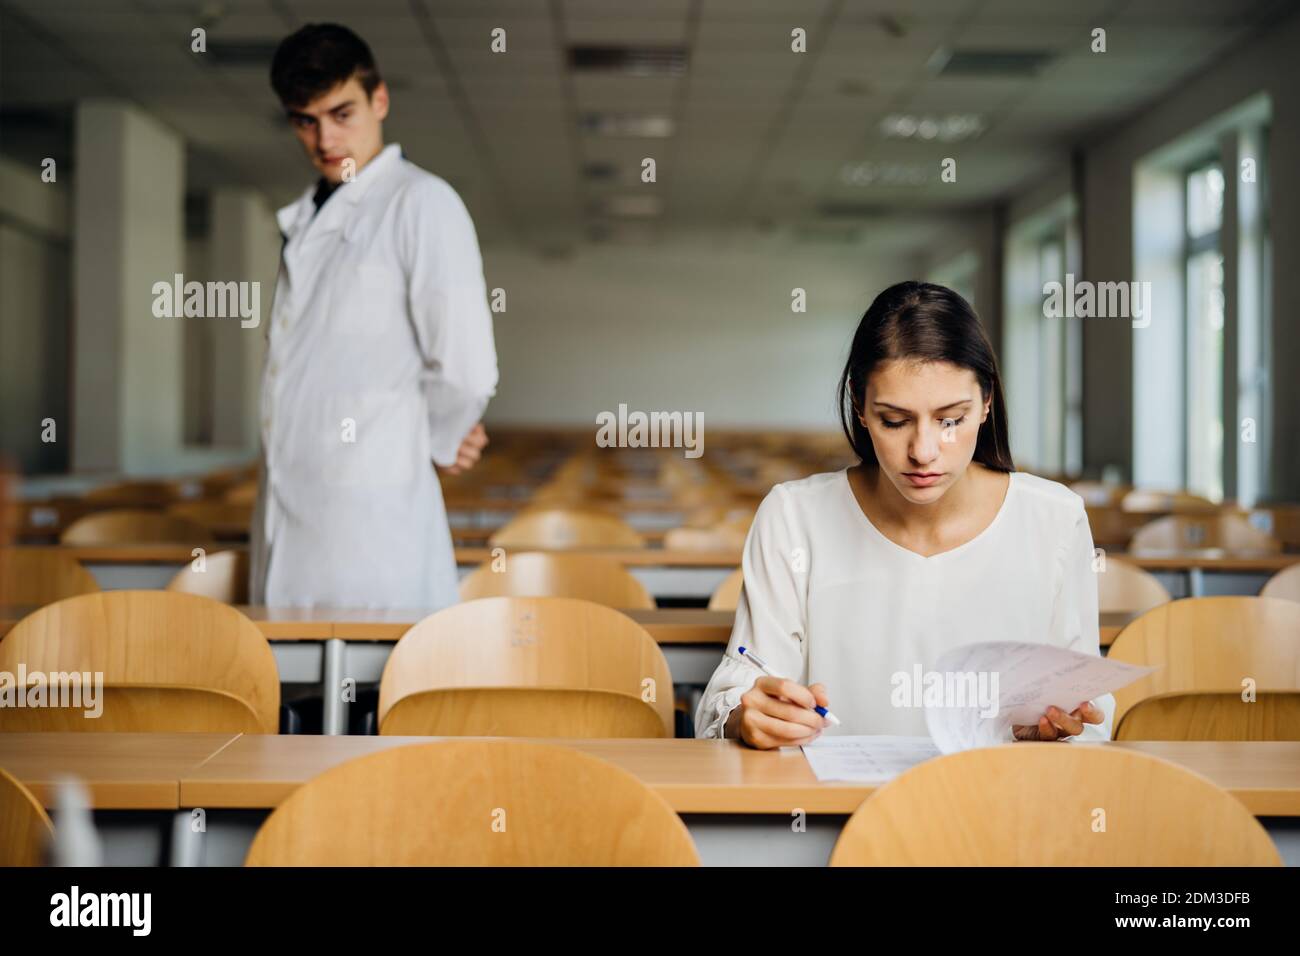 Female student taking an exam in an empty amphitheater. Stressed student taking in-class test. Concerned woman having education evaluation.Supervisor Stock Photo